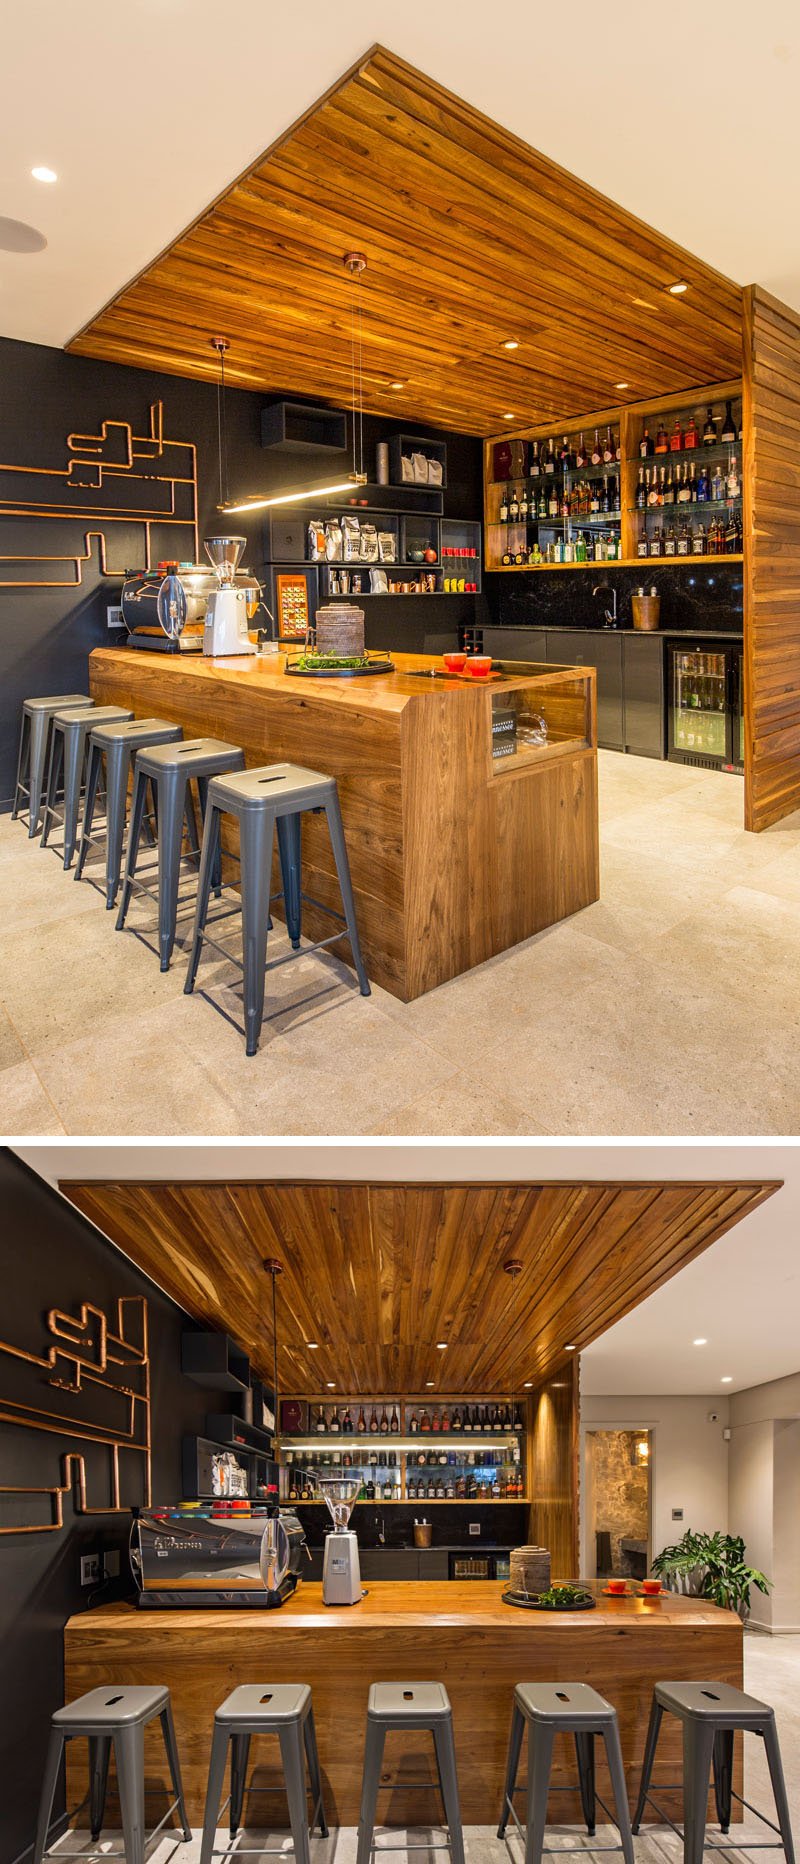 This modern wood bar has everything needed for making high quality coffee and cocktails. Black floating rectangular boxes blend in to the dark accent wall and provide additional storage.